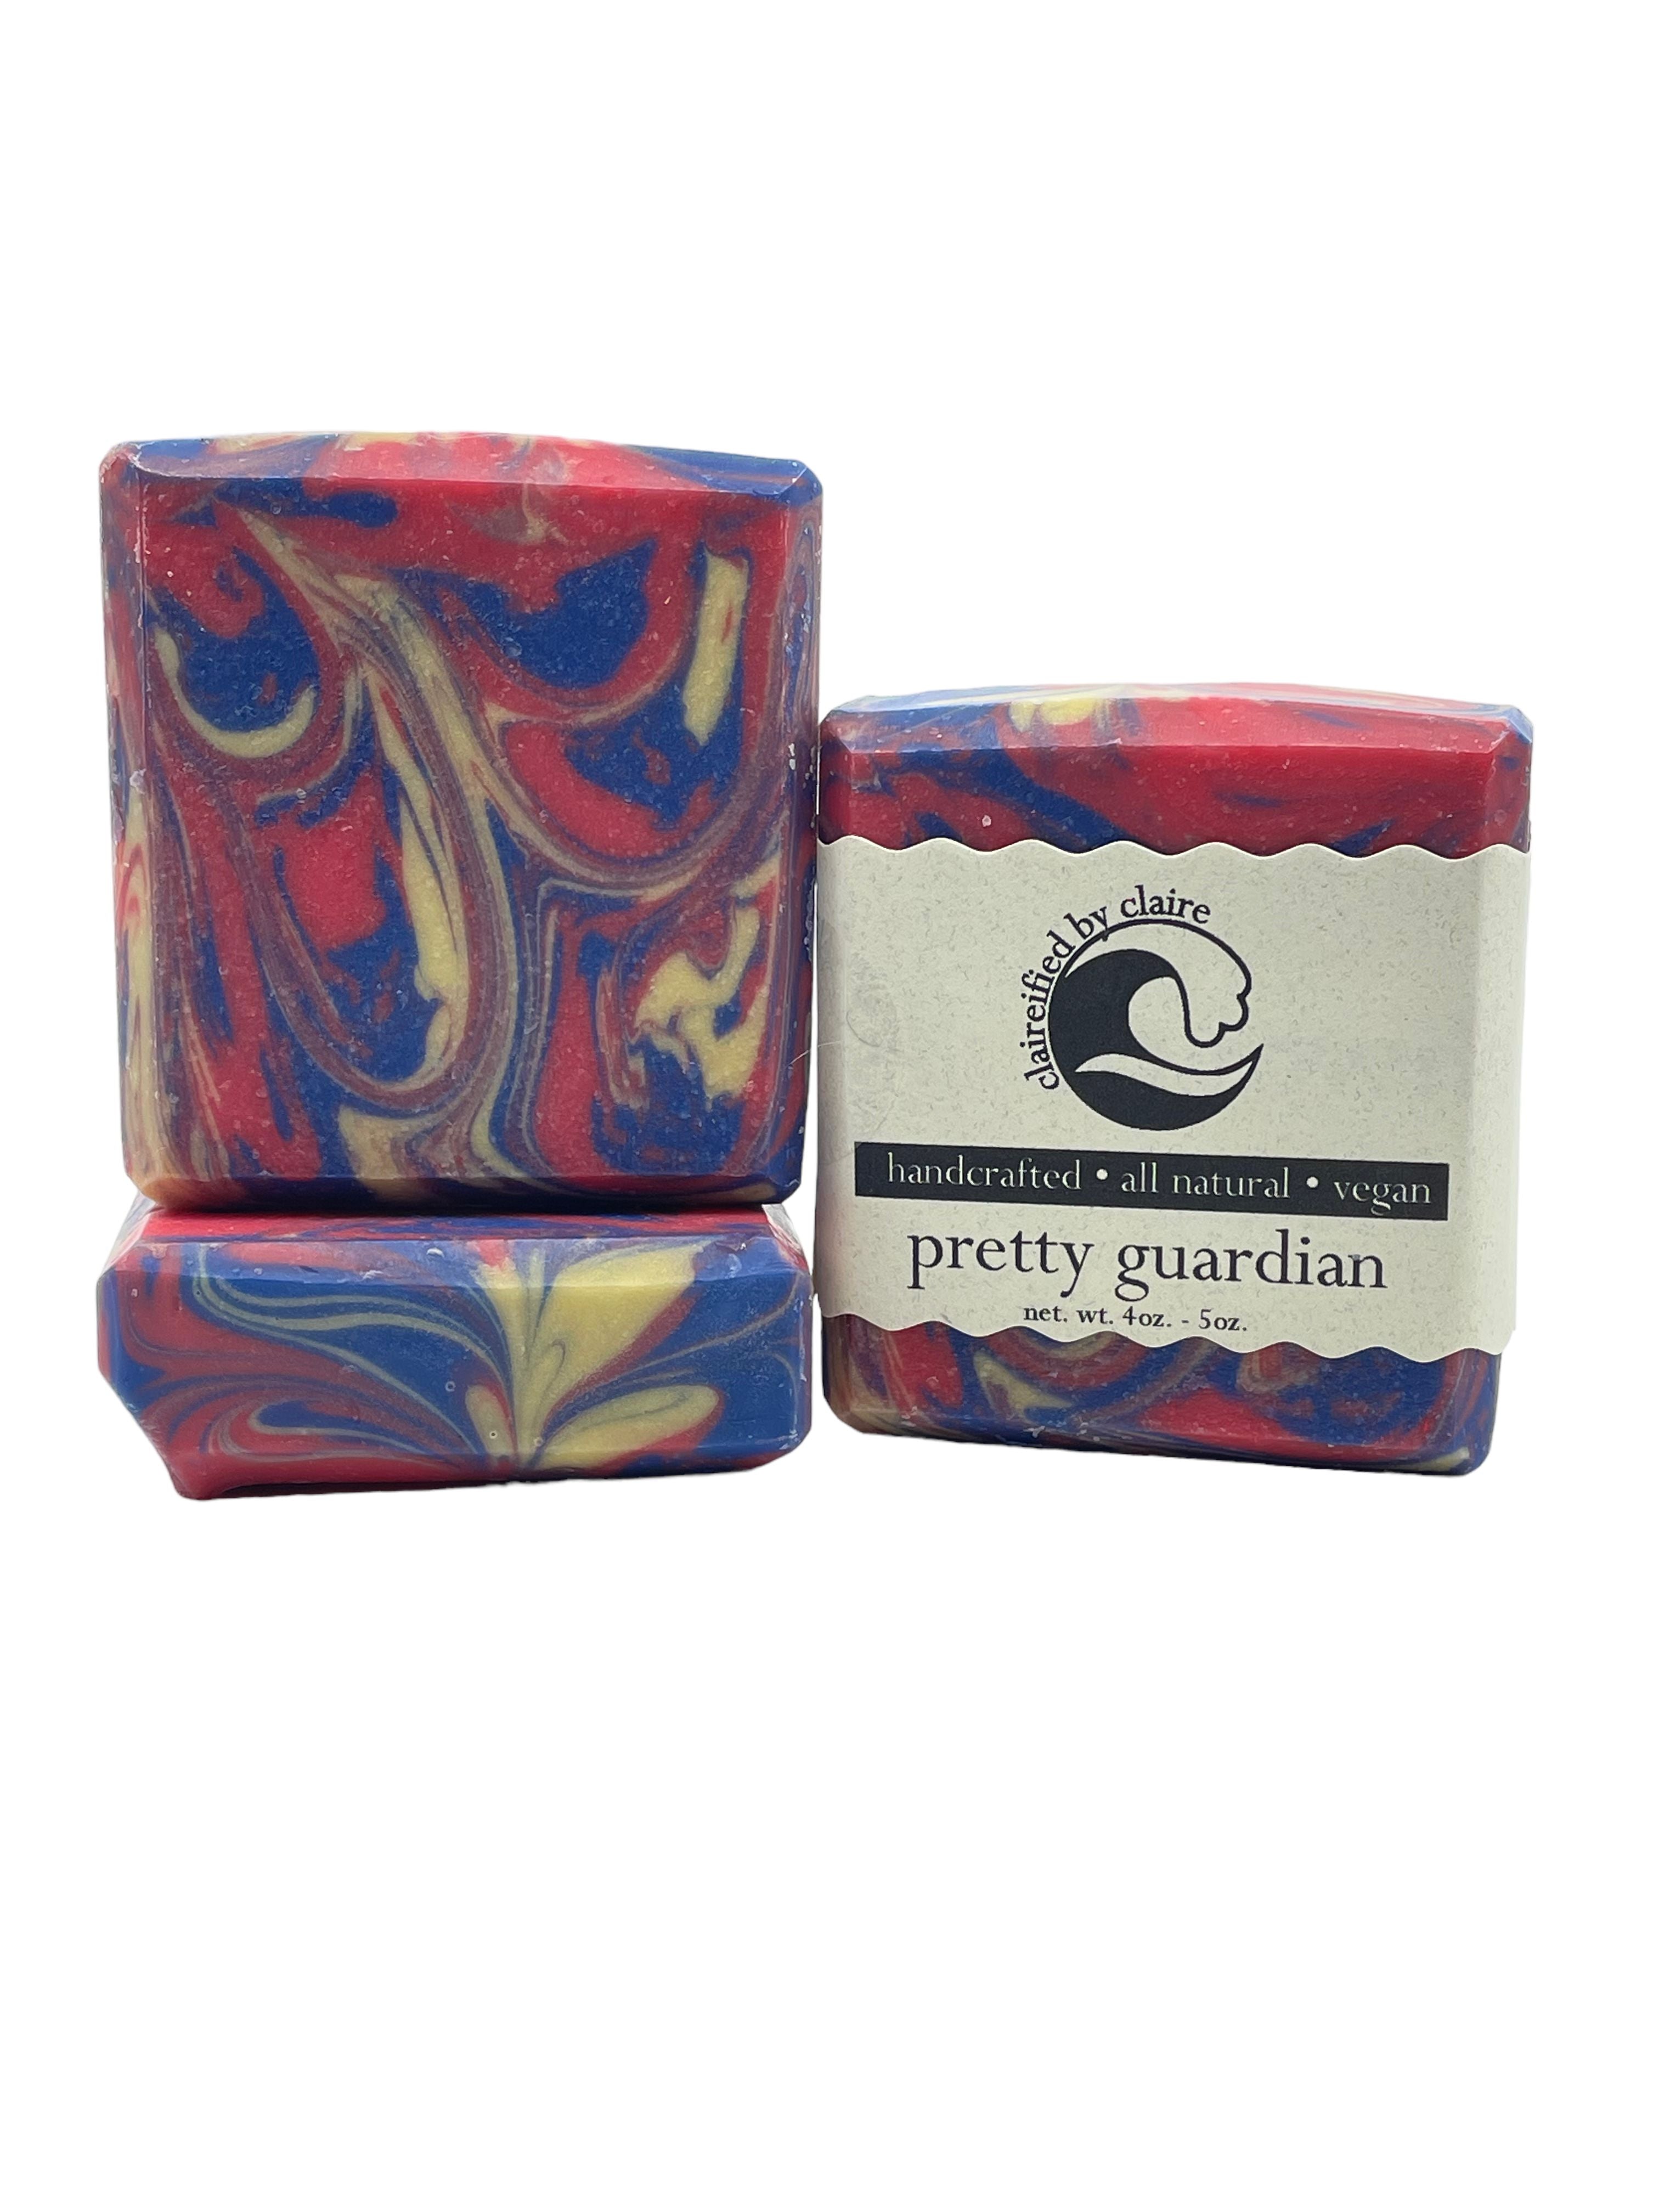 Pretty Guardian - Sailor Moon Inspired Soap